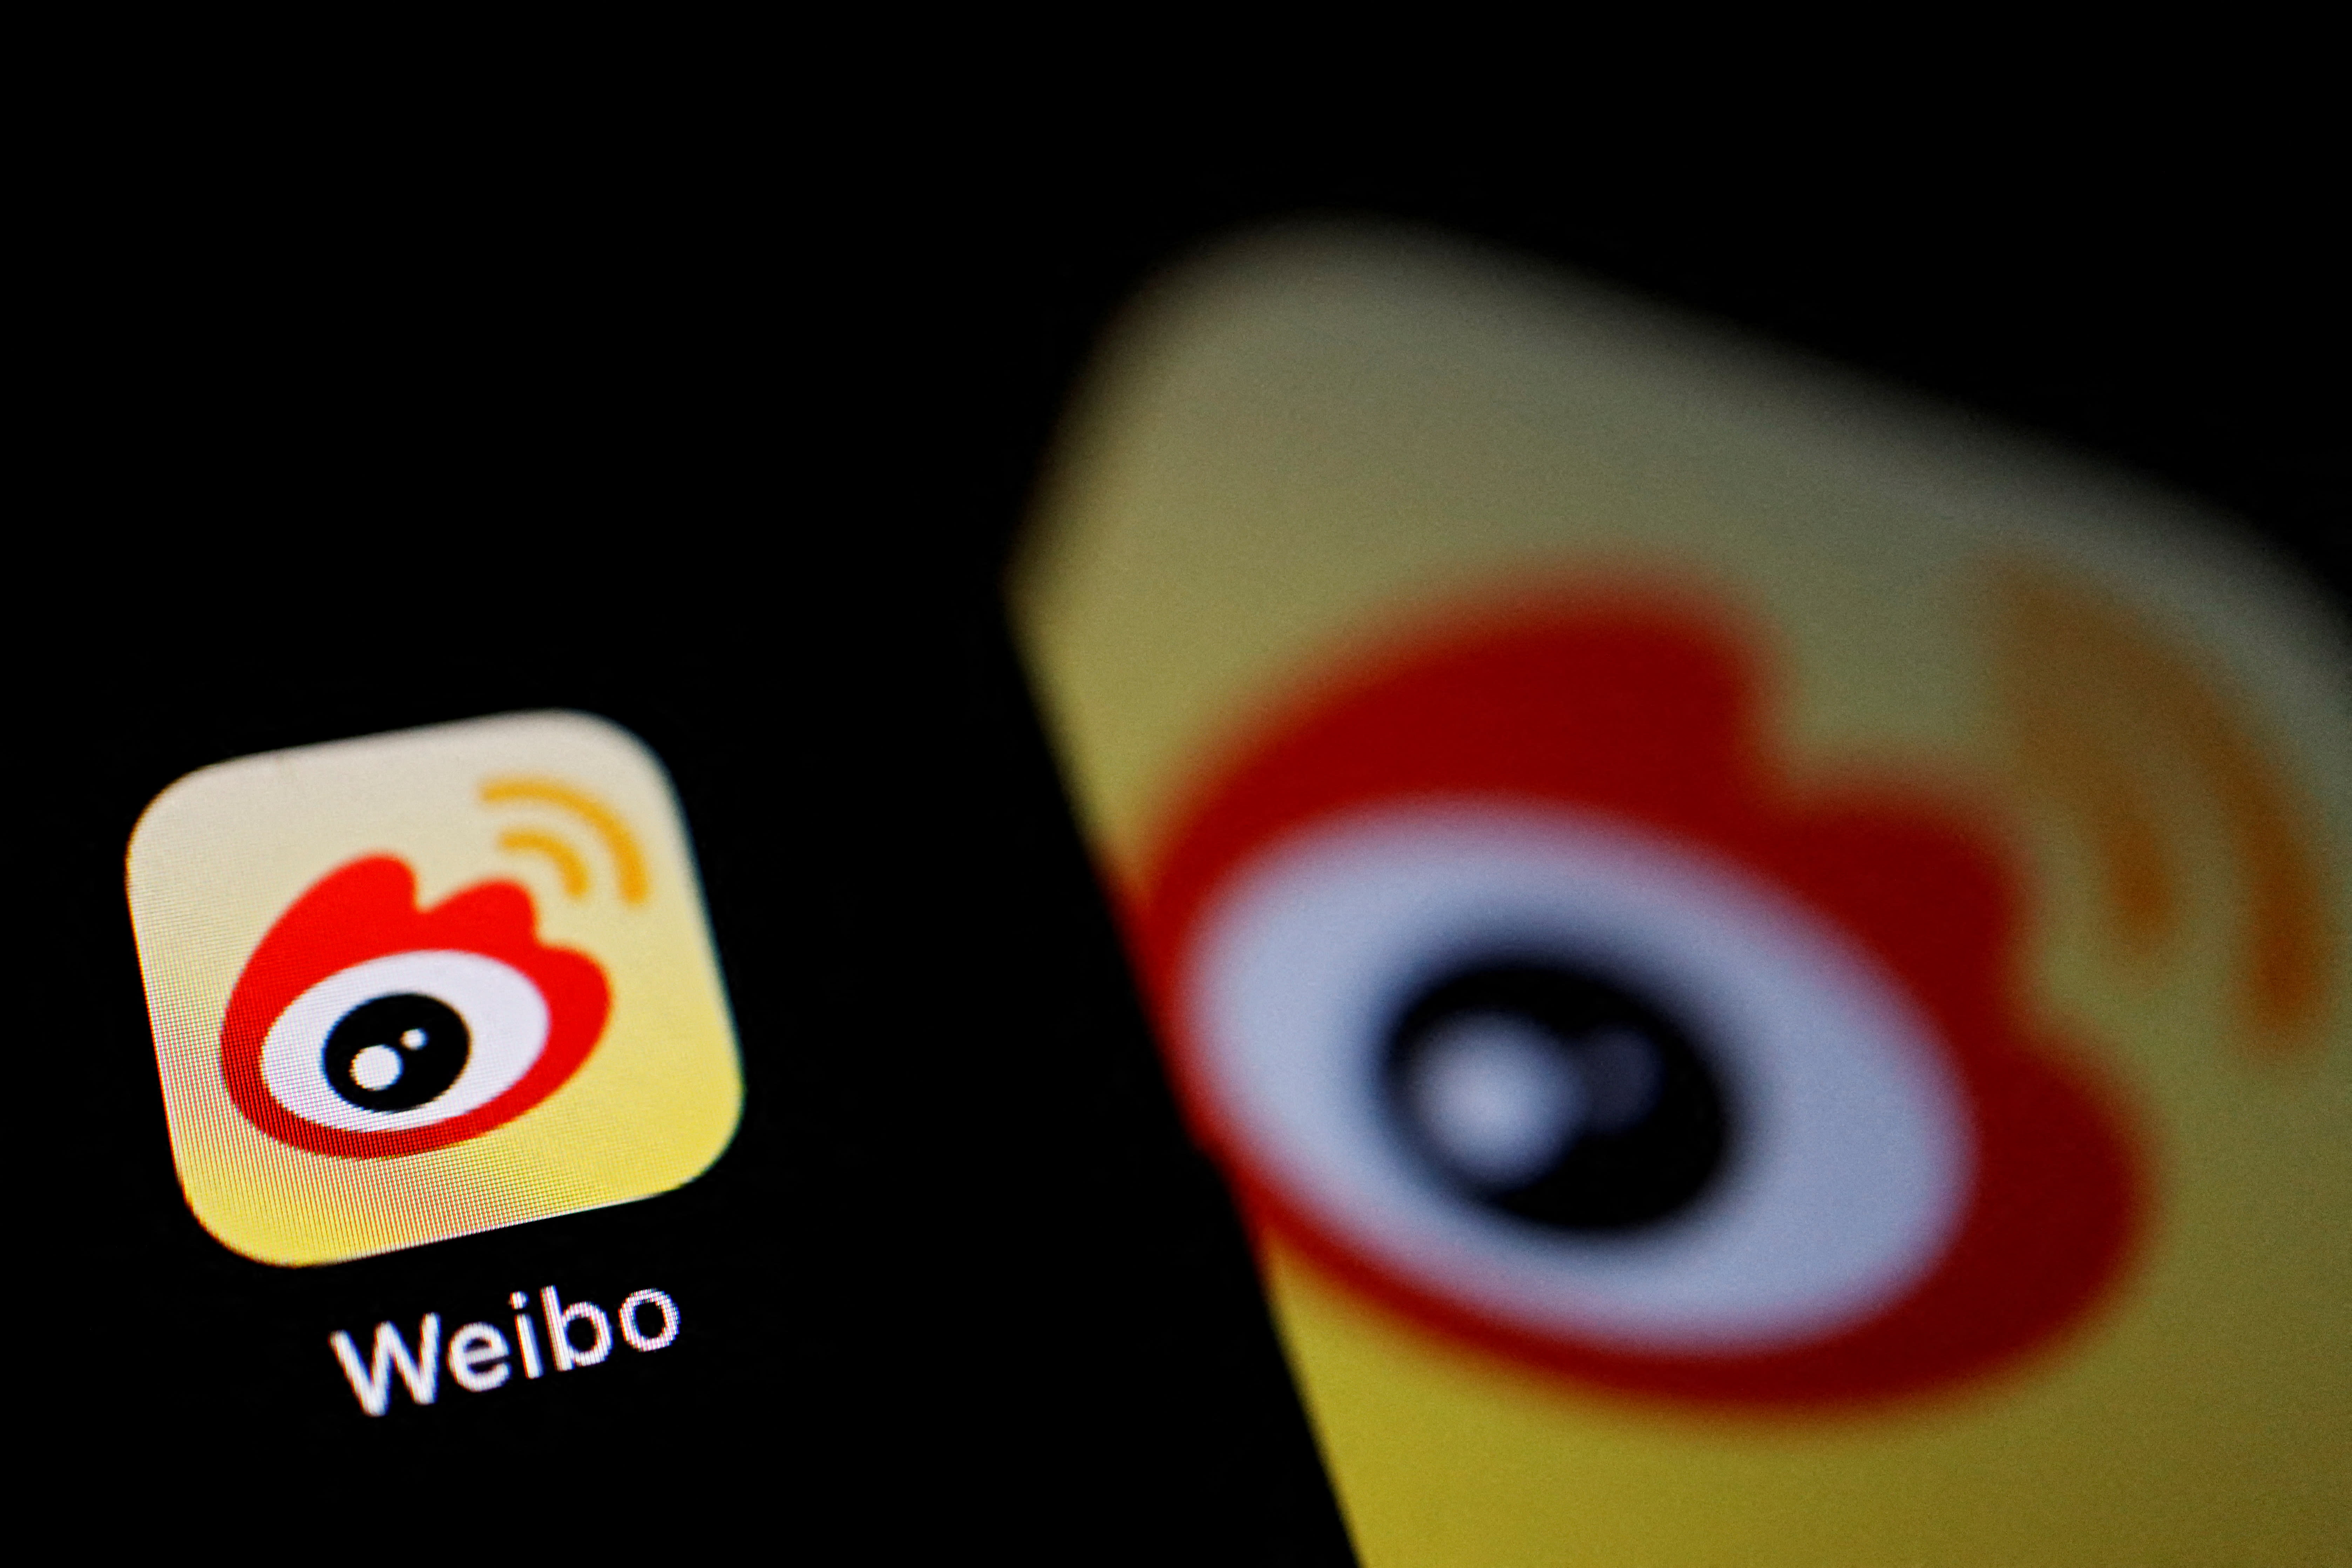 The logo of Chinese social media app Weibo is seen on a mobile phone in this illustration picture taken on Dec 7, 2021. 
